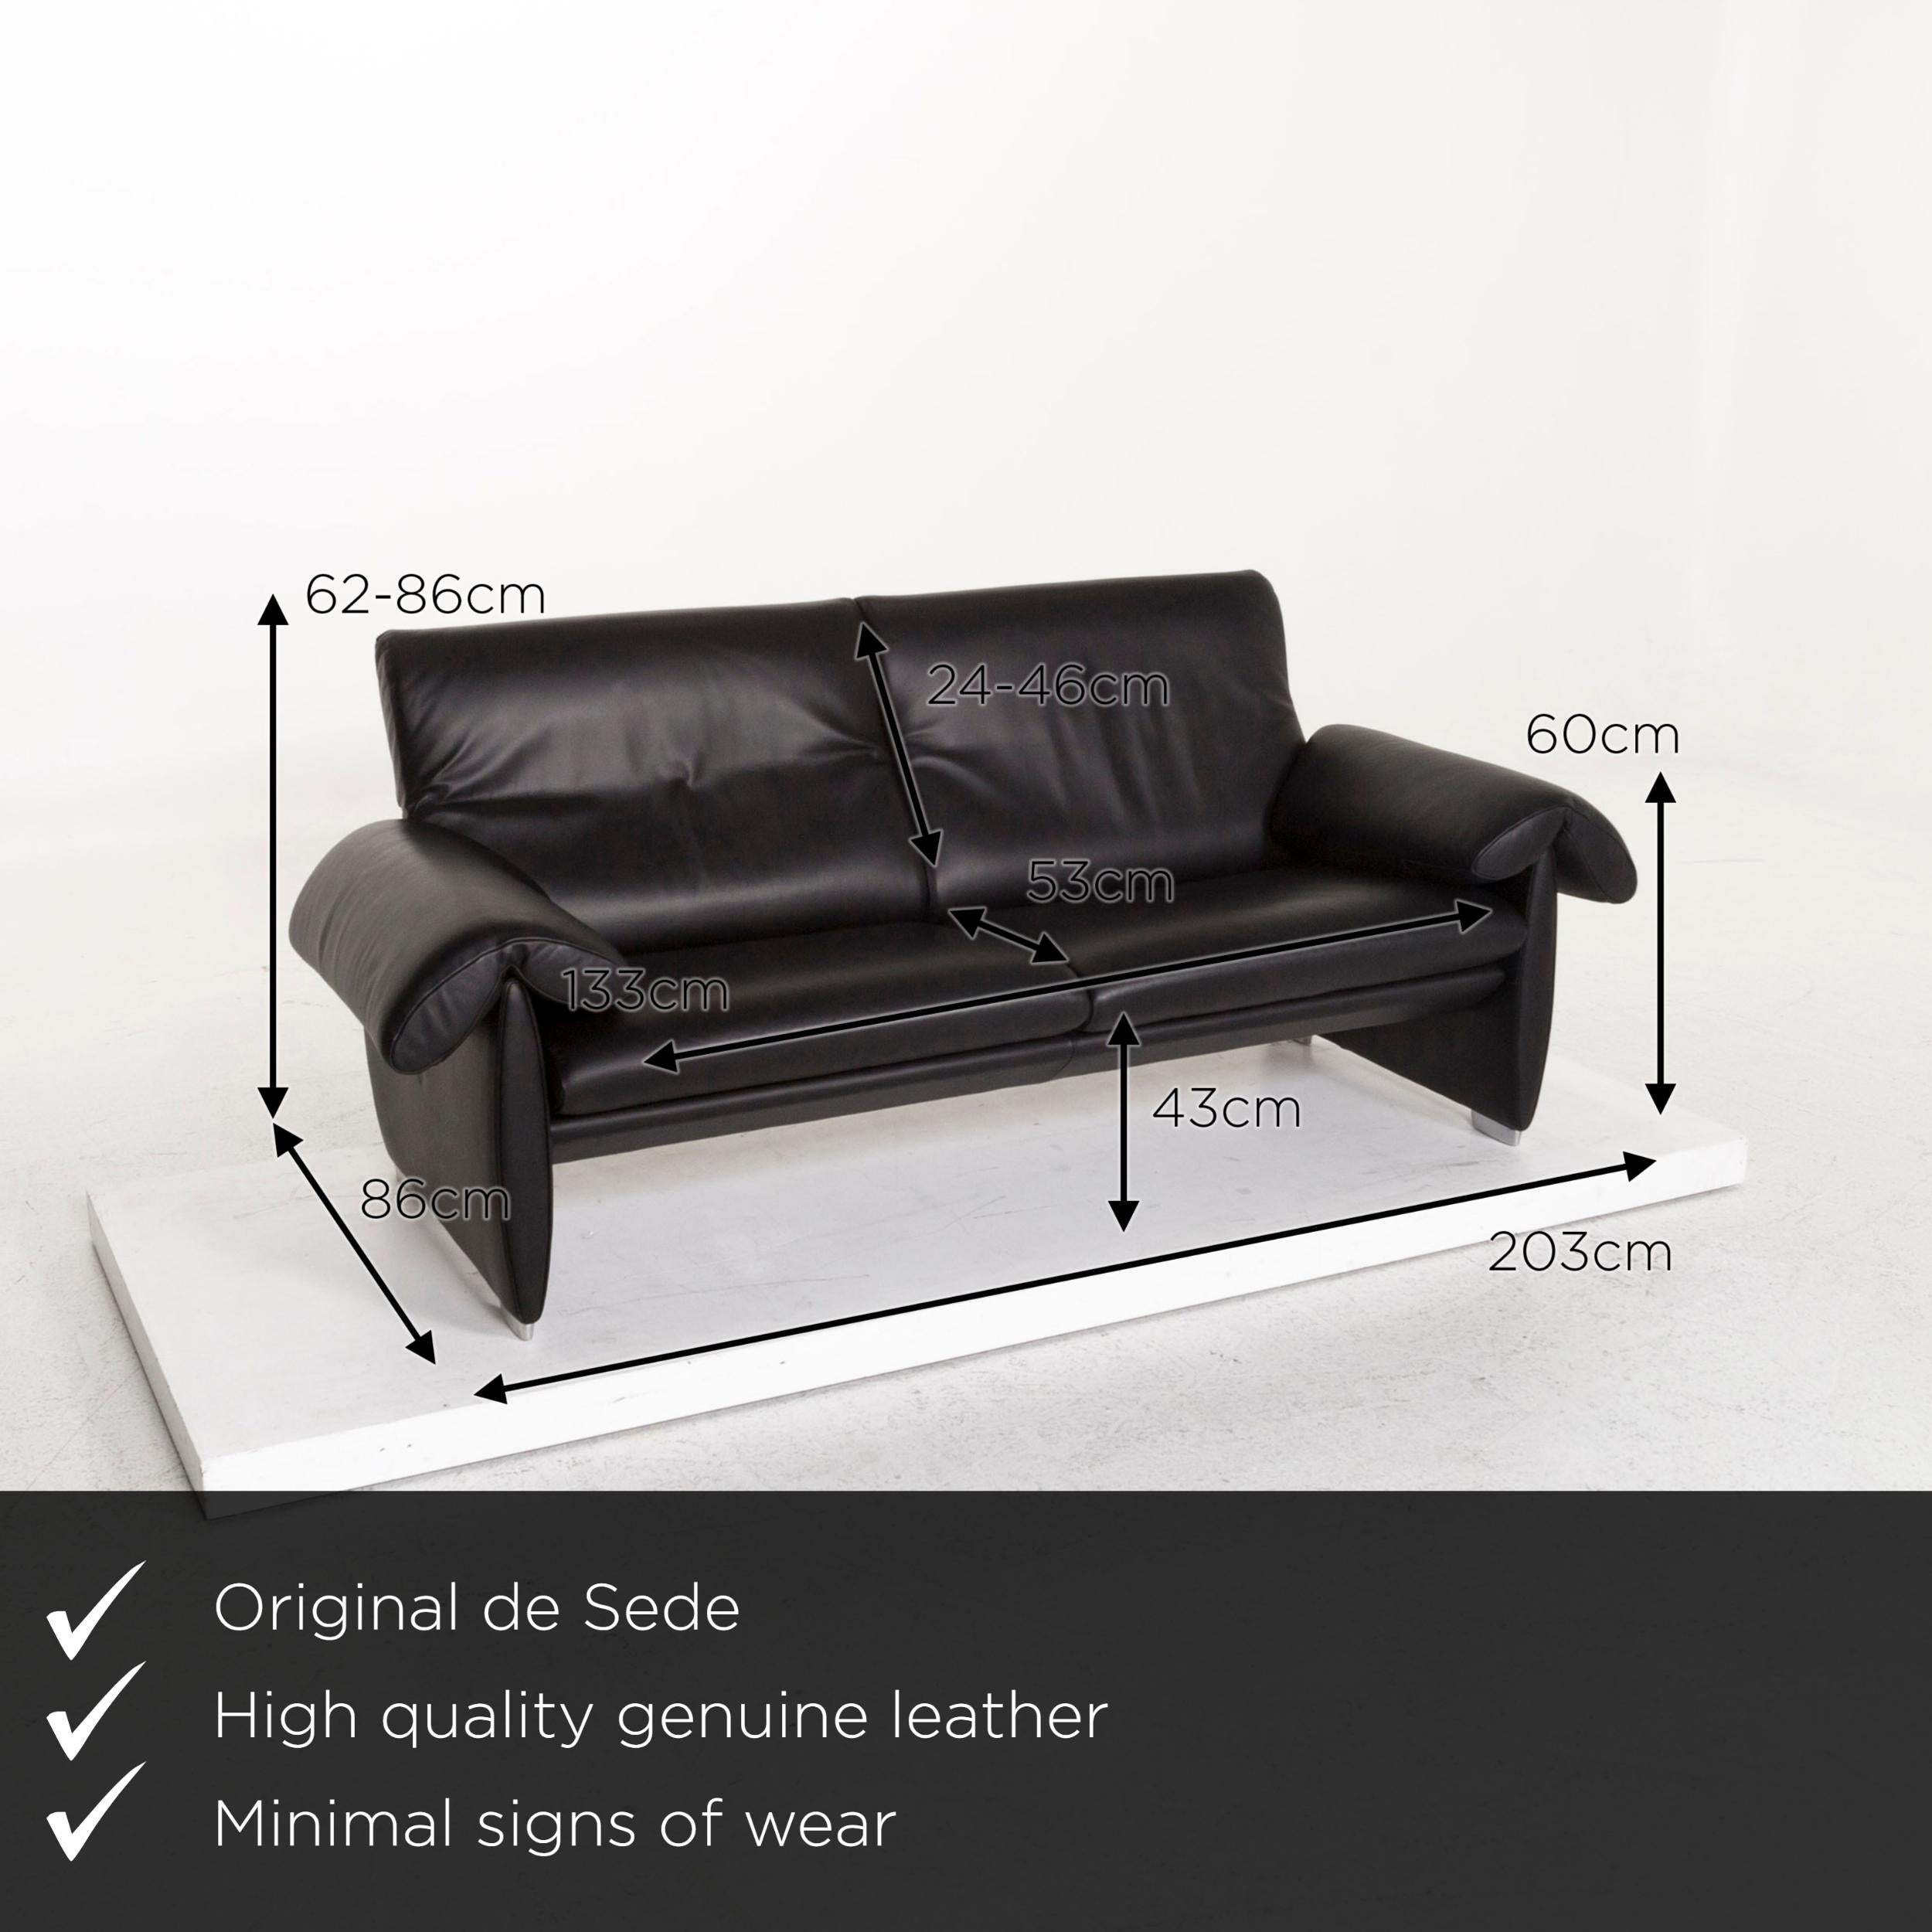 We present to you a de Sede DS 10 leather sofa black two-seat couch.
 

 Product measurements in centimeters:
 

Depth 86
Width 203
Height 86
Seat height 43
Rest height 60
Seat depth 53
Seat width 133
Back height 46.

 